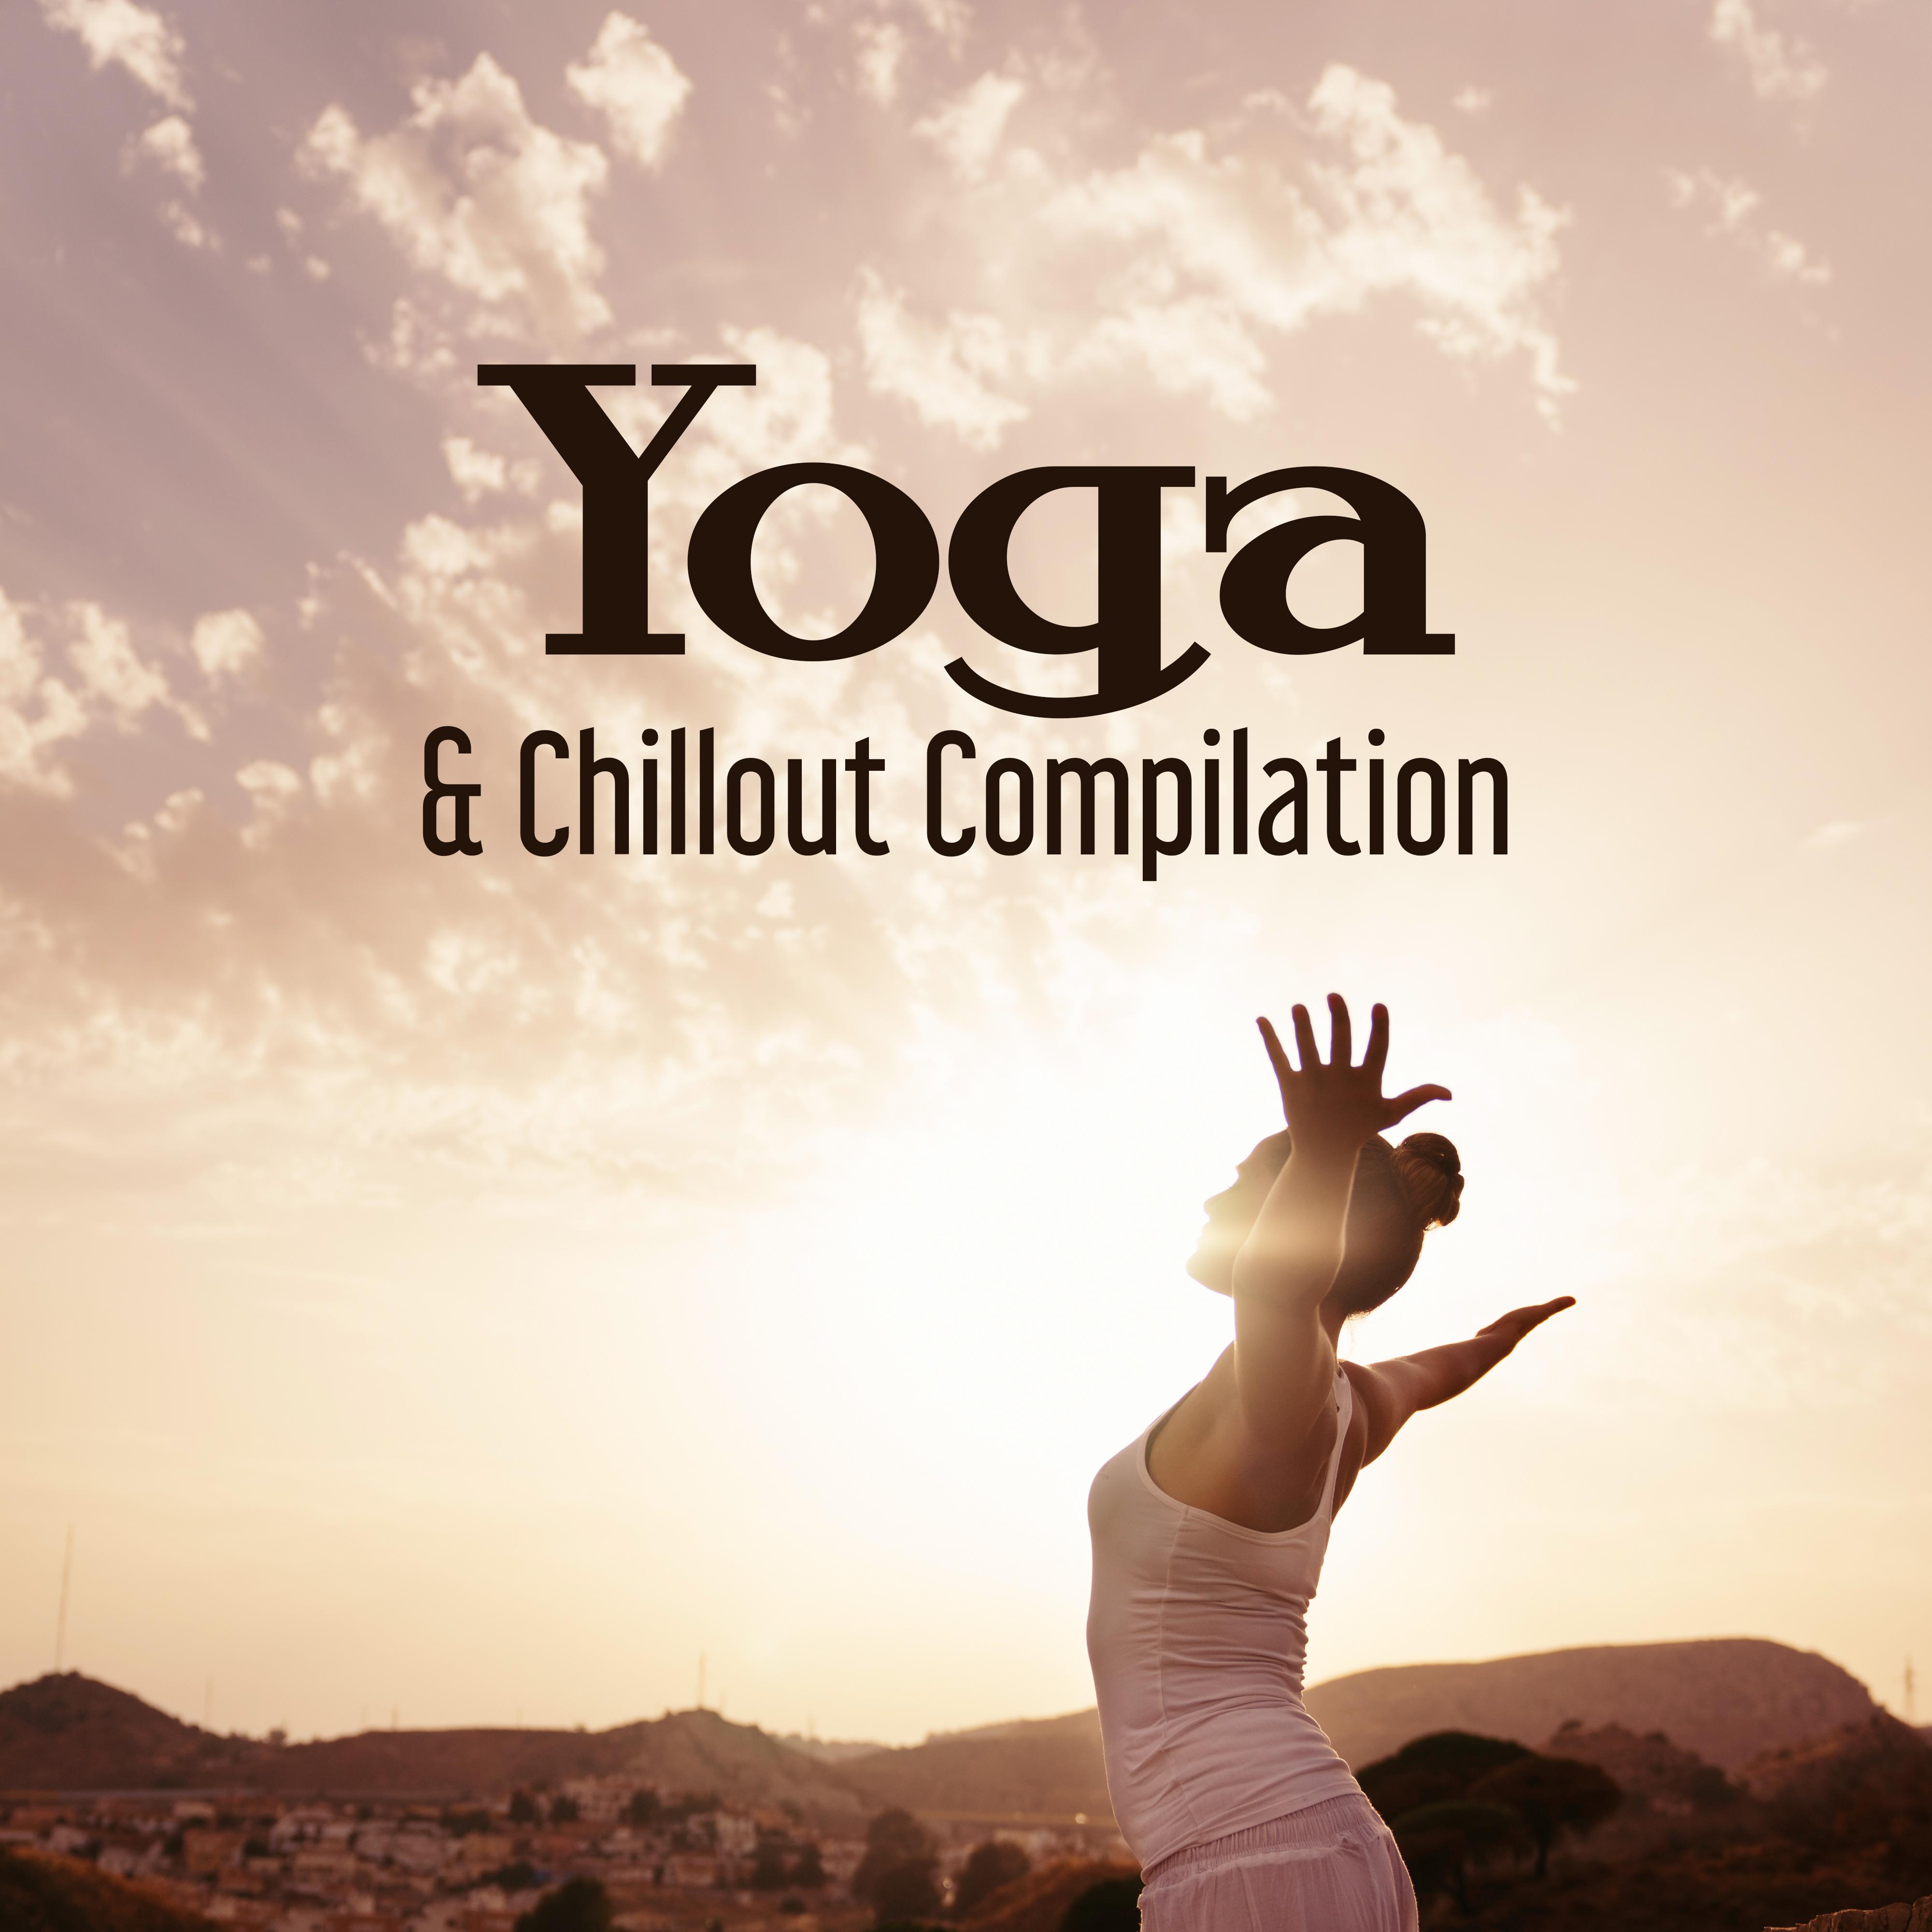 Yoga & Chillout Compilation